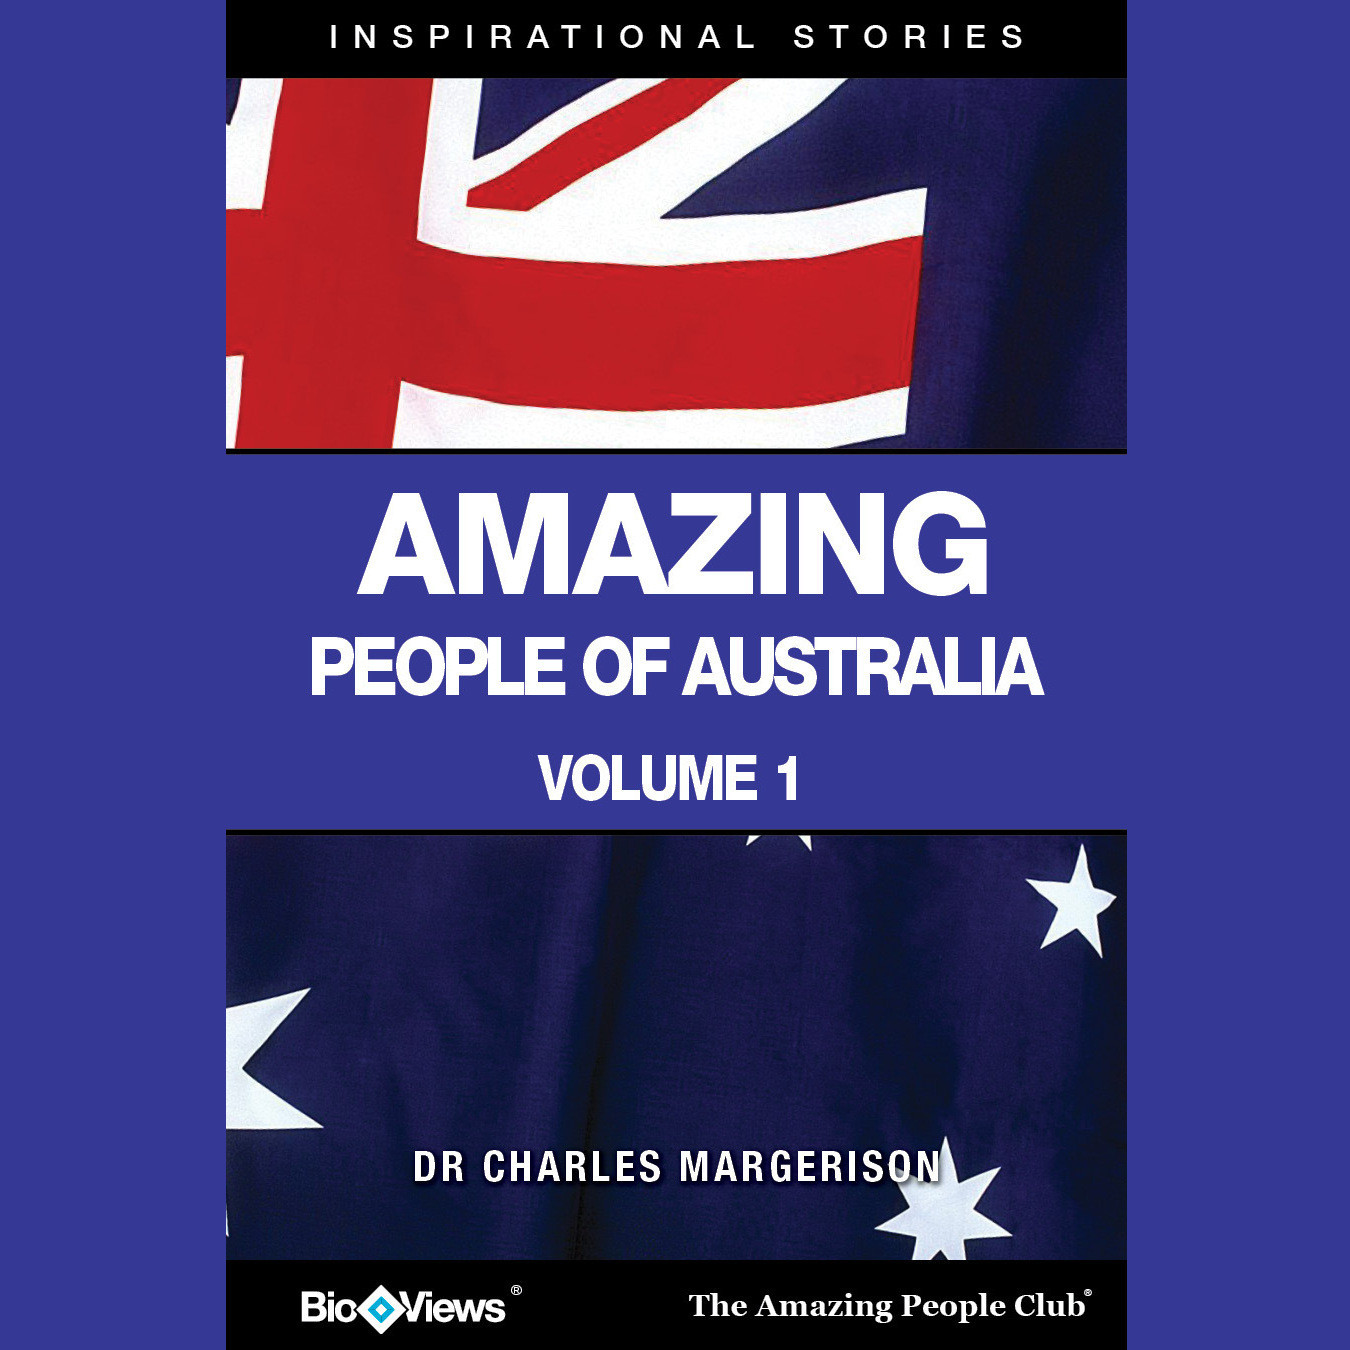 Amazing People of Australia, Vol. 1: Inspirational Stories Audiobook, by Charles Margerison